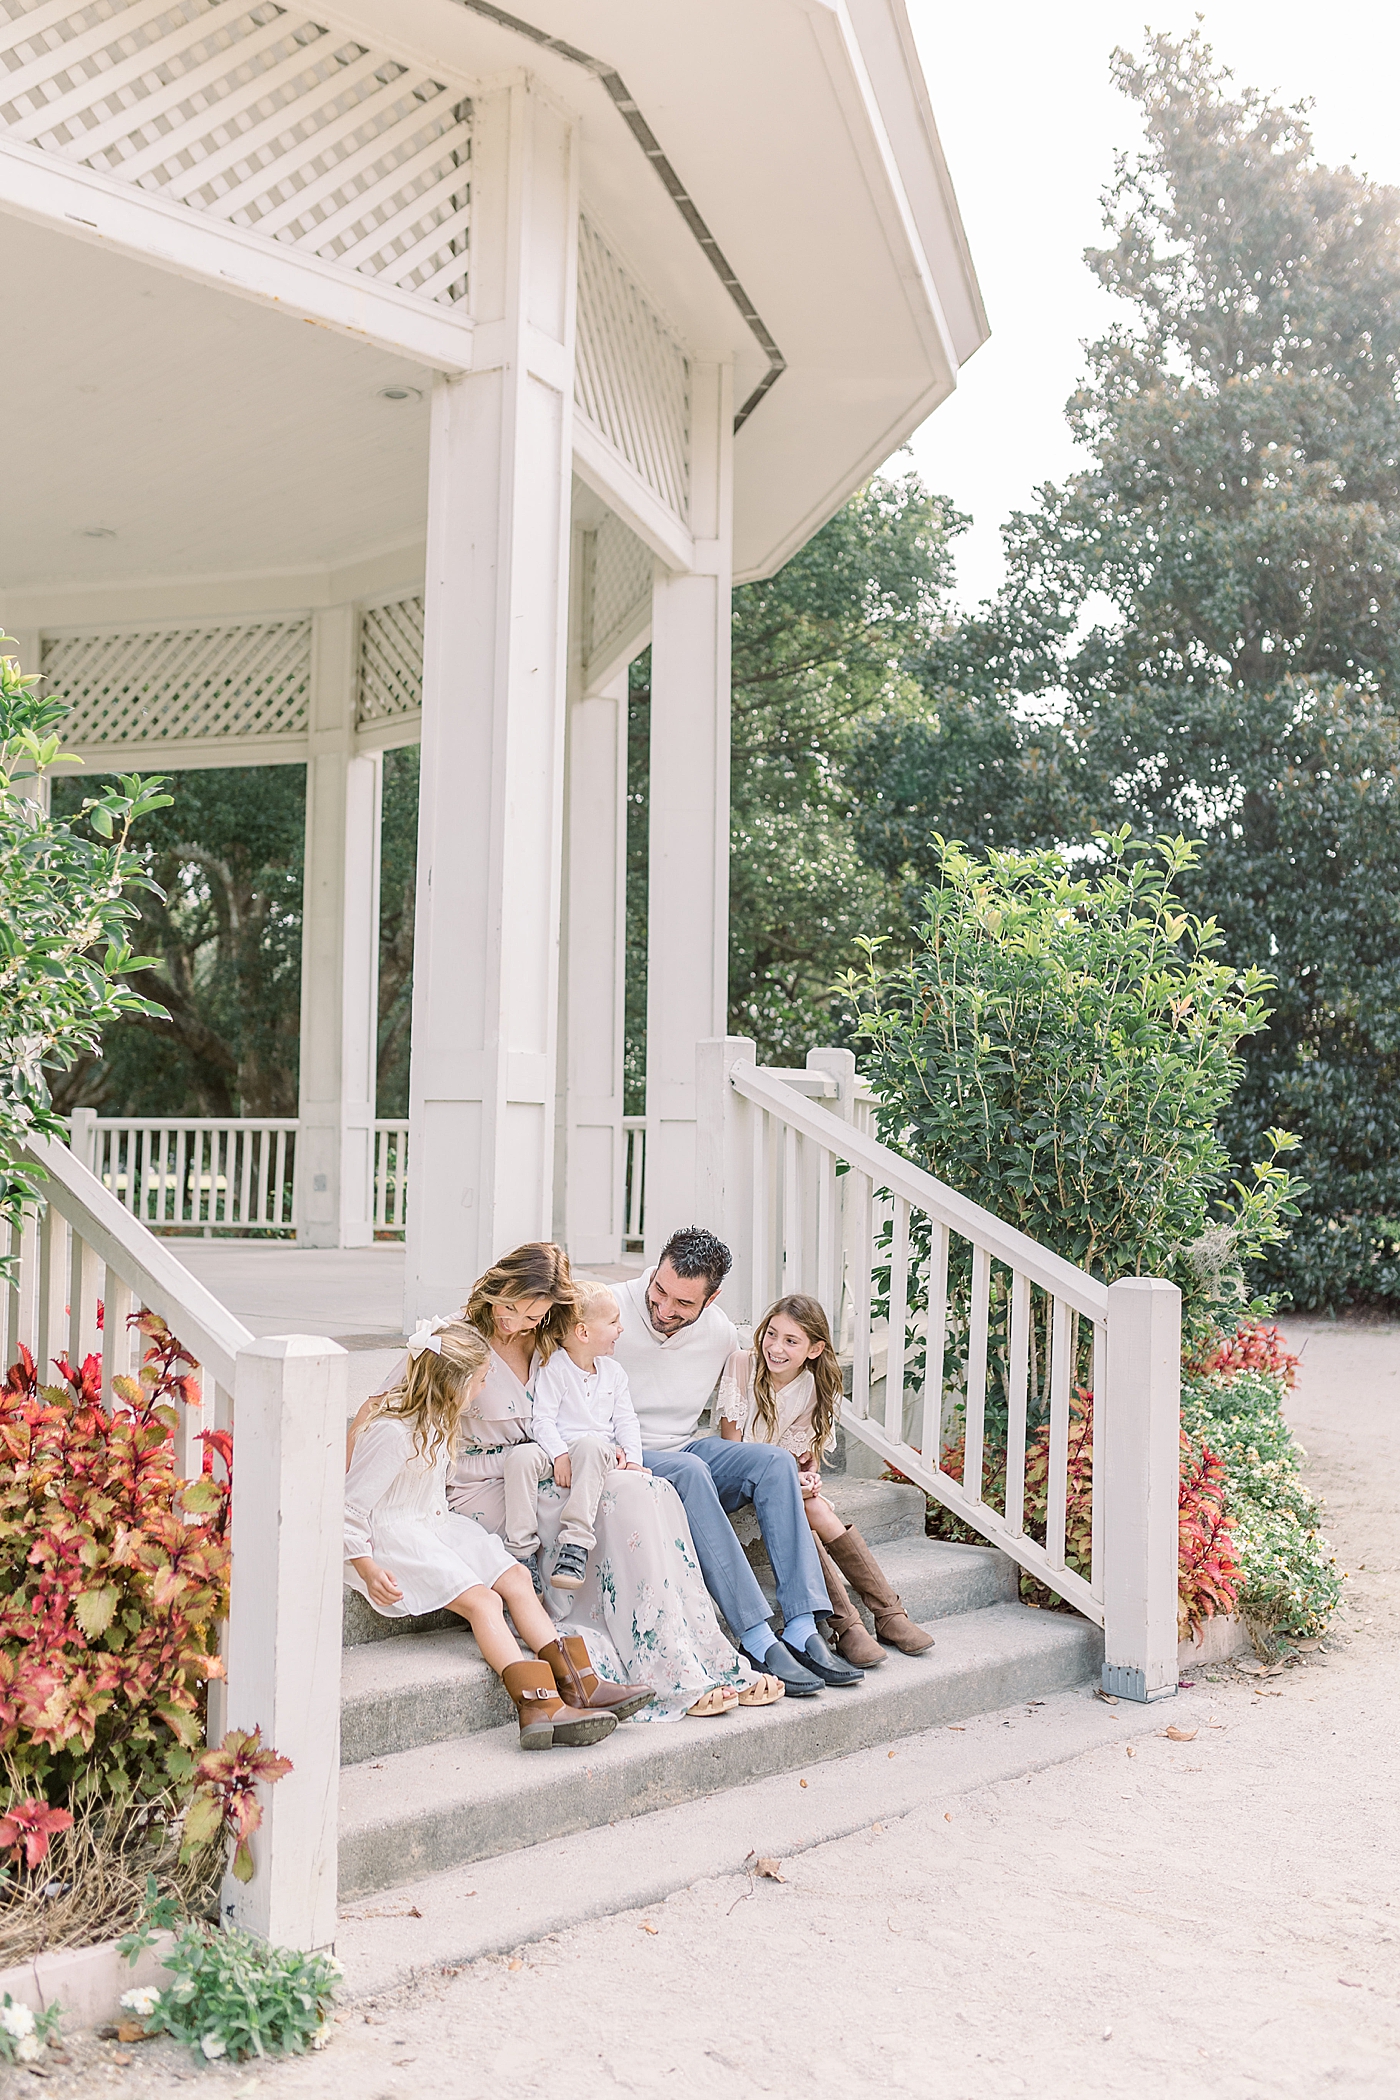 Couple sitting with their kids on the steps | Photo by Caitlyn Motycka Photography